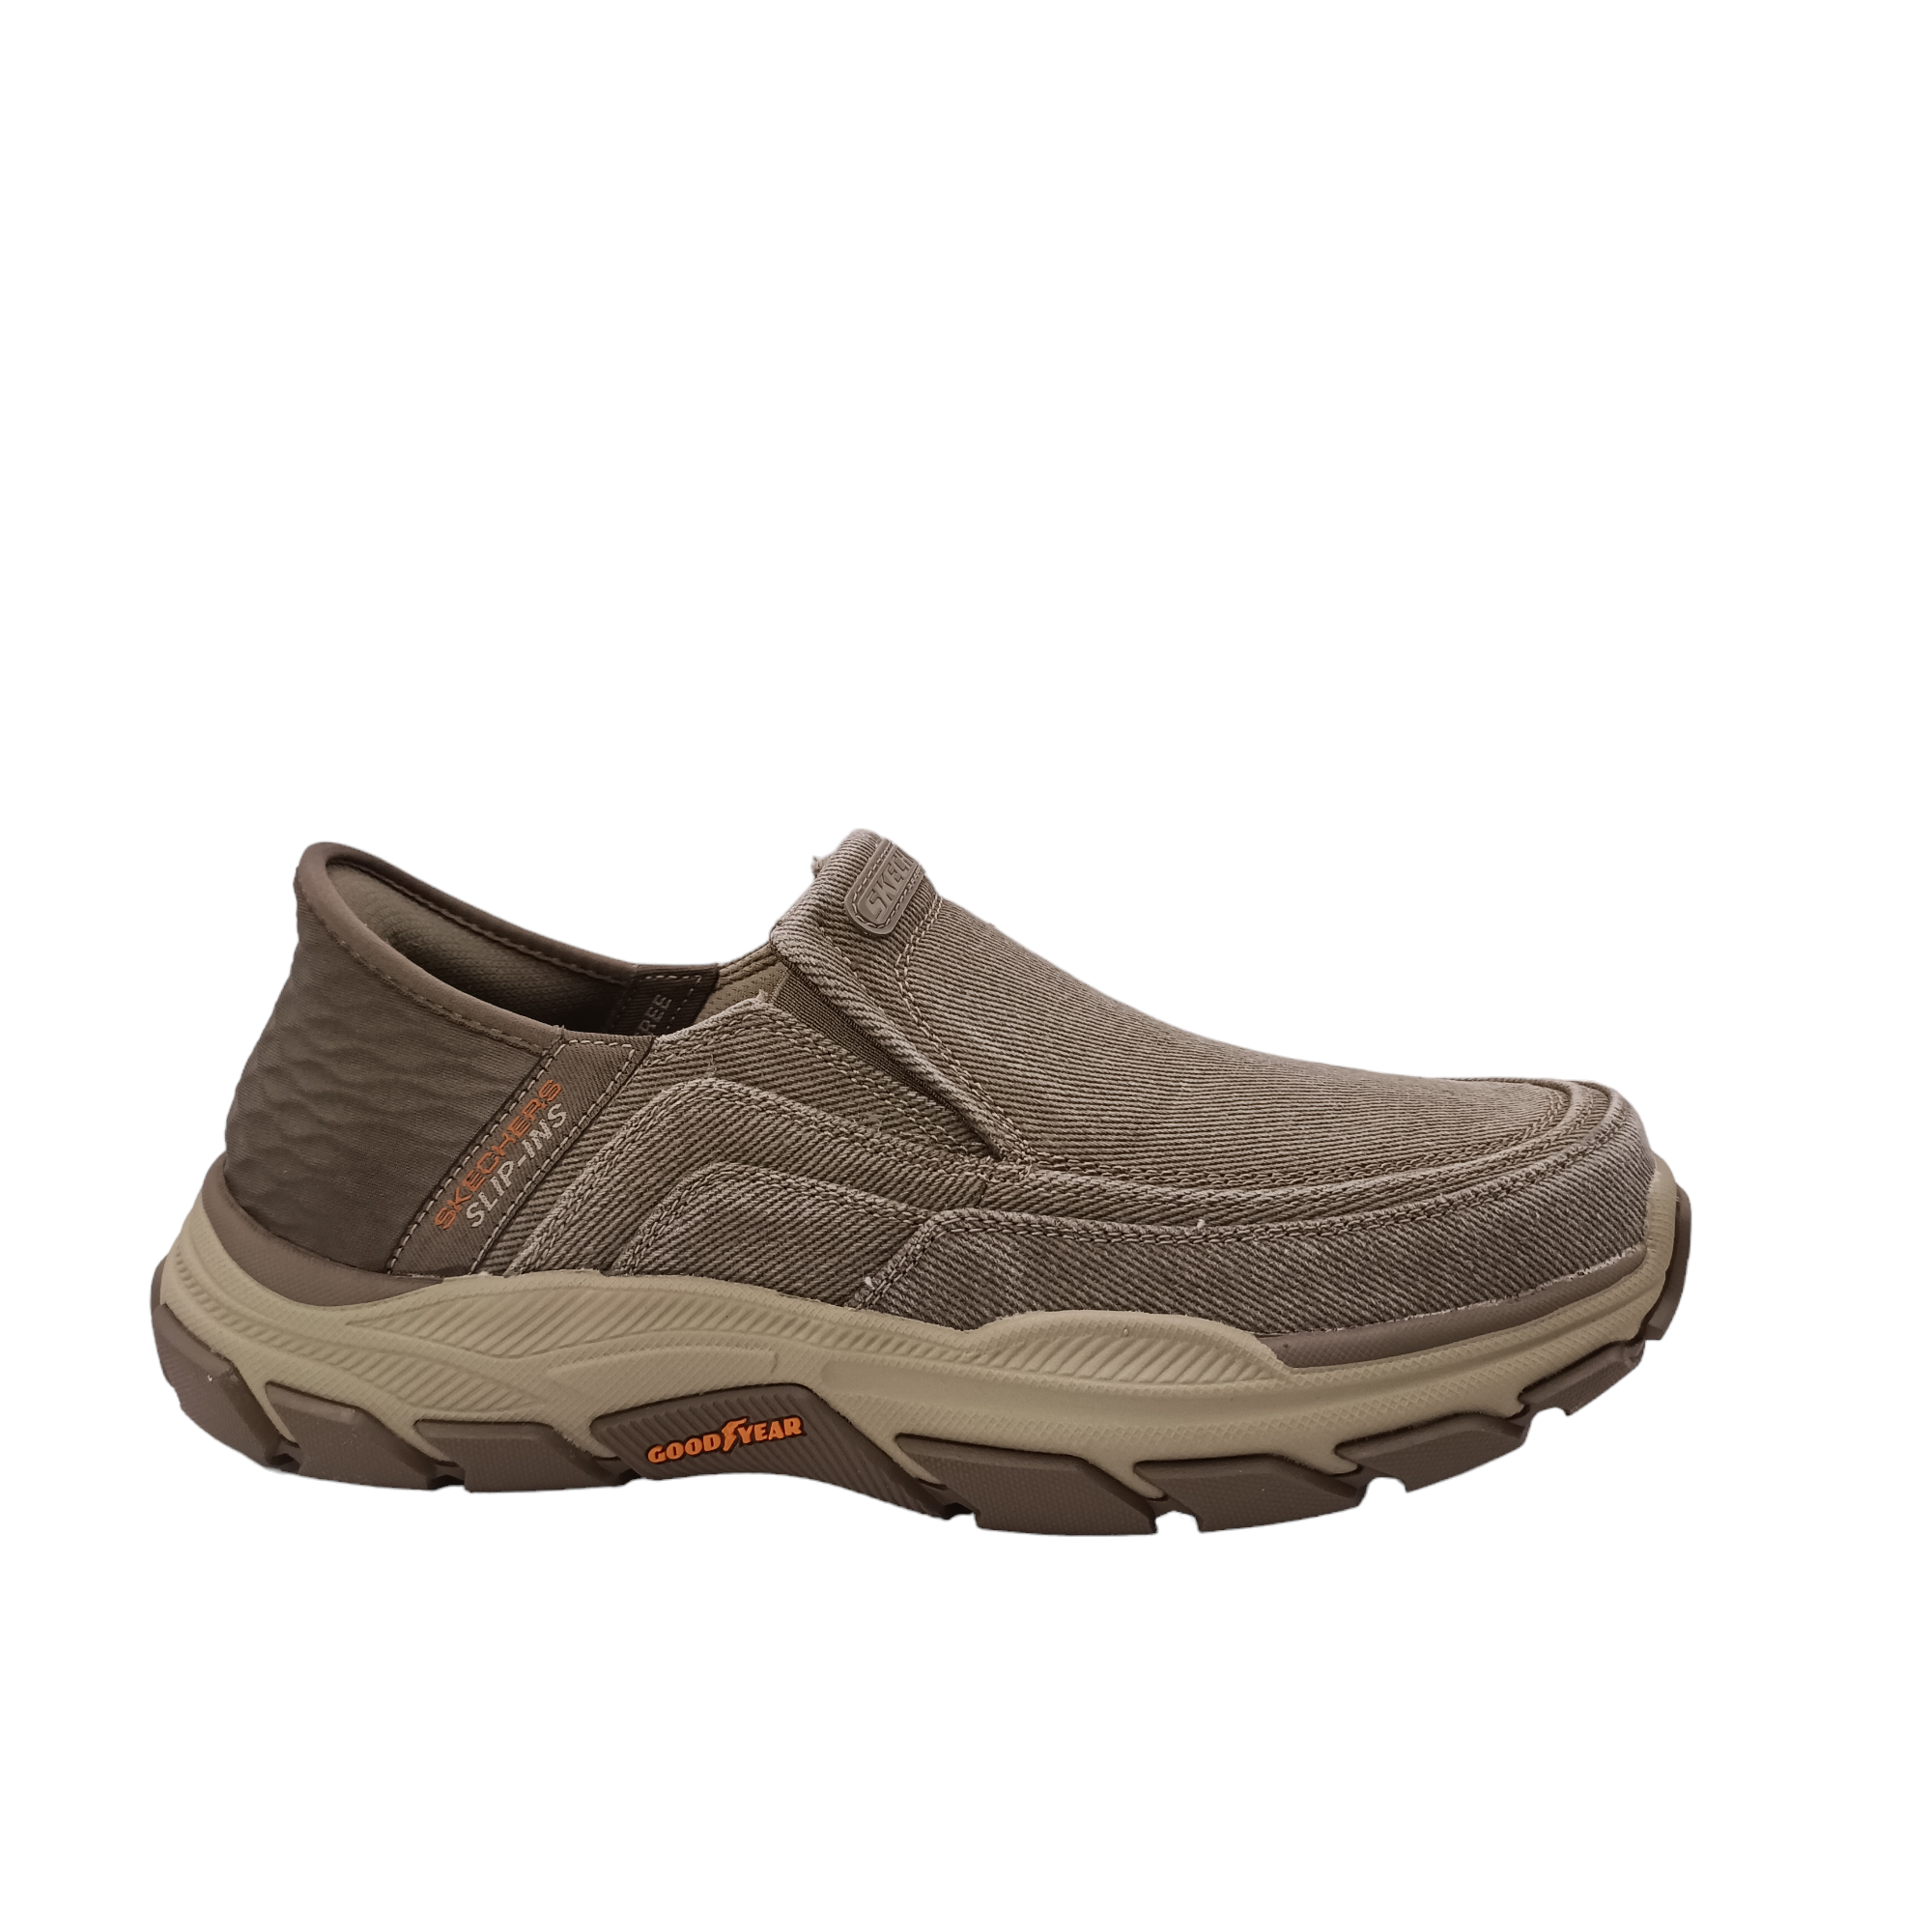 Holmgren from Skechers. Side angled view of shoe with slip-in technology on the heel, a firm and cushioned heel for easy entry without hands. Rugged looked sole with a synthetic upper with visible stitching. Wide fitting with two small external gussets. Shop Online and in-store with shoe&amp;me Mount Maunganui Tauranga